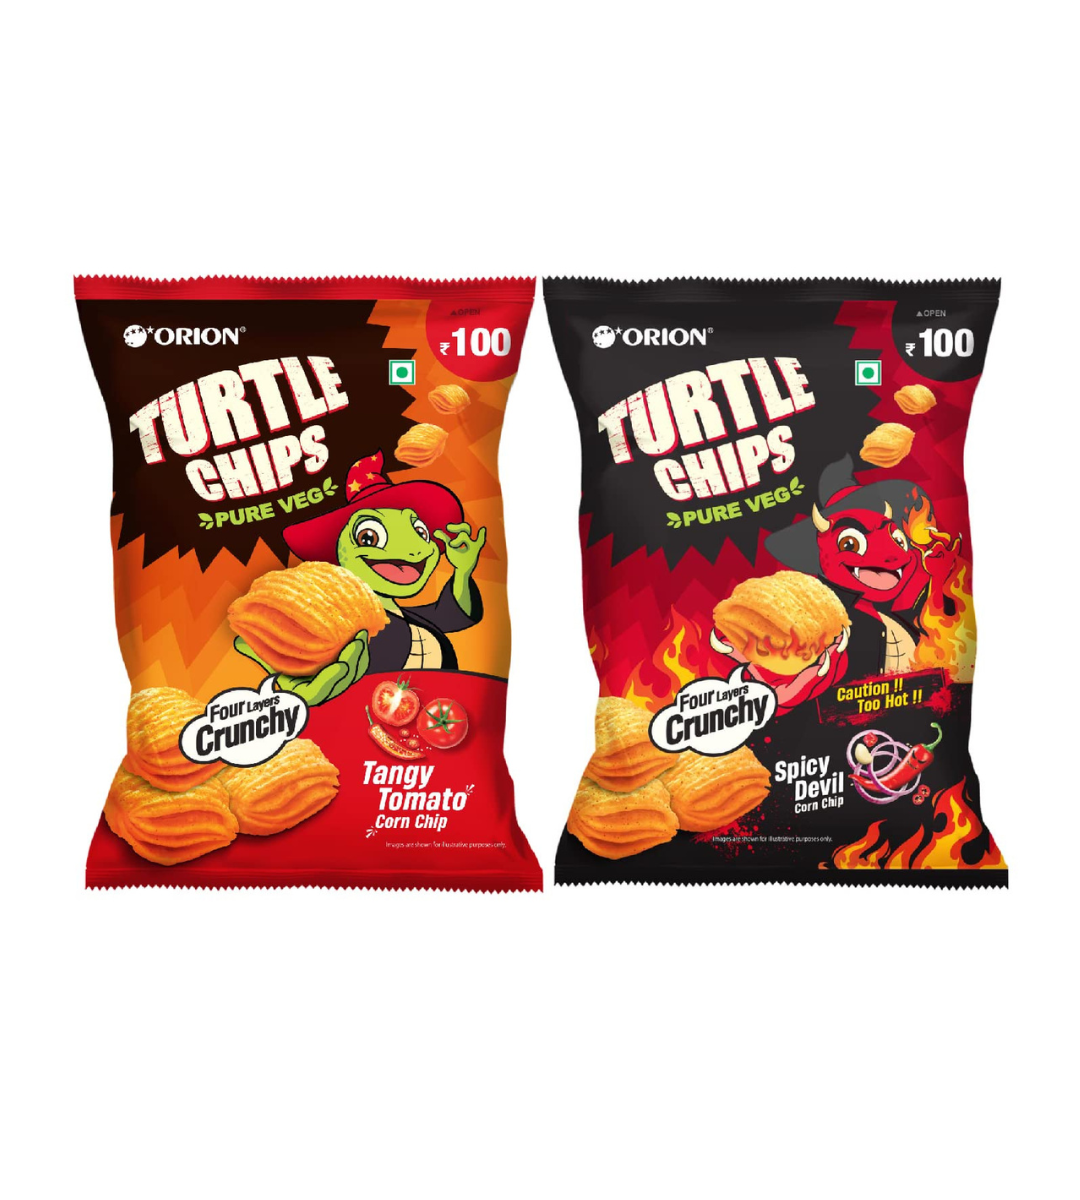 Orion Turtle Chips Party Pack (Pack of 2) - Tangy Tomato & Spicy Devil Flavors|100% Veg|Korean Snacks - 115 gm (Pack of 2)